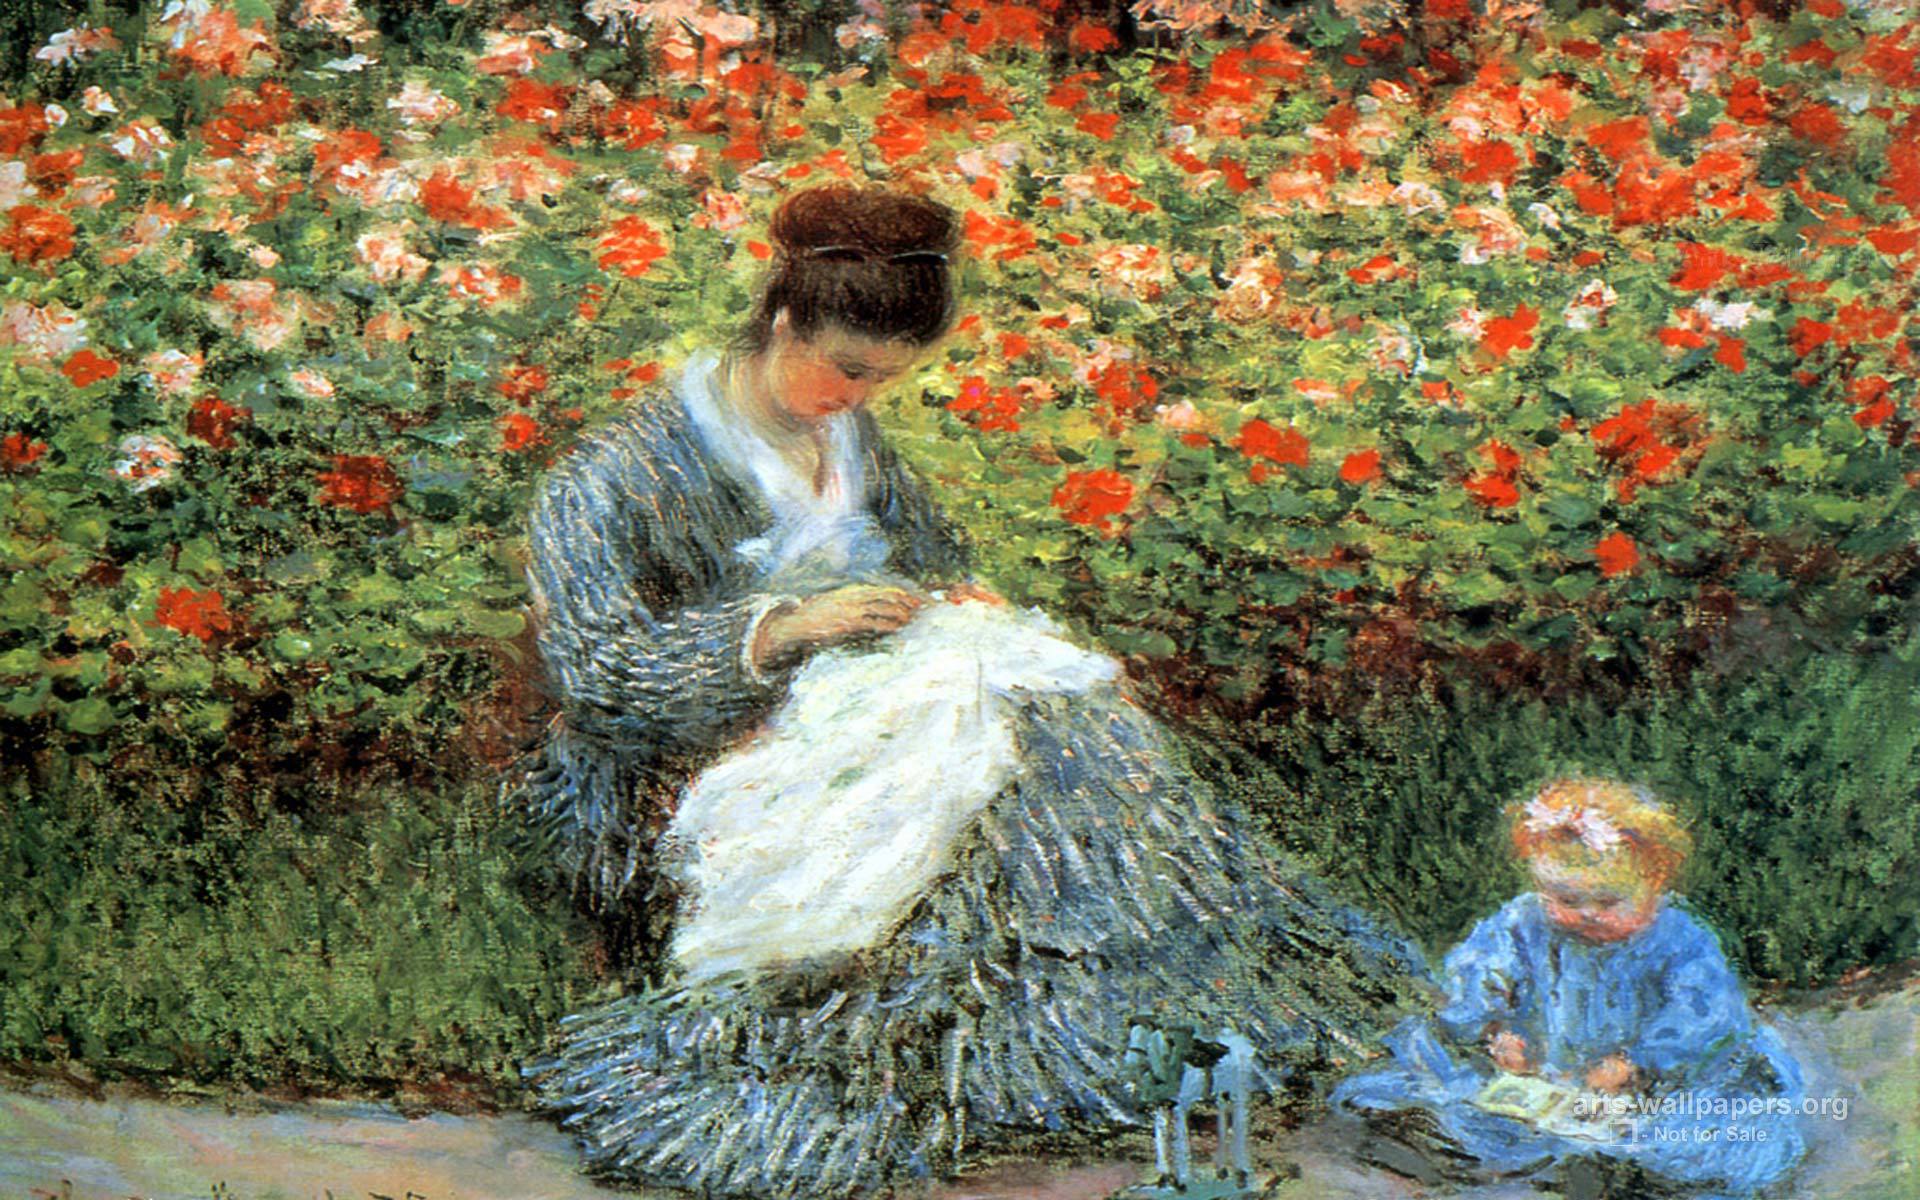 Painting Claude Monet with a child wallpaper and image